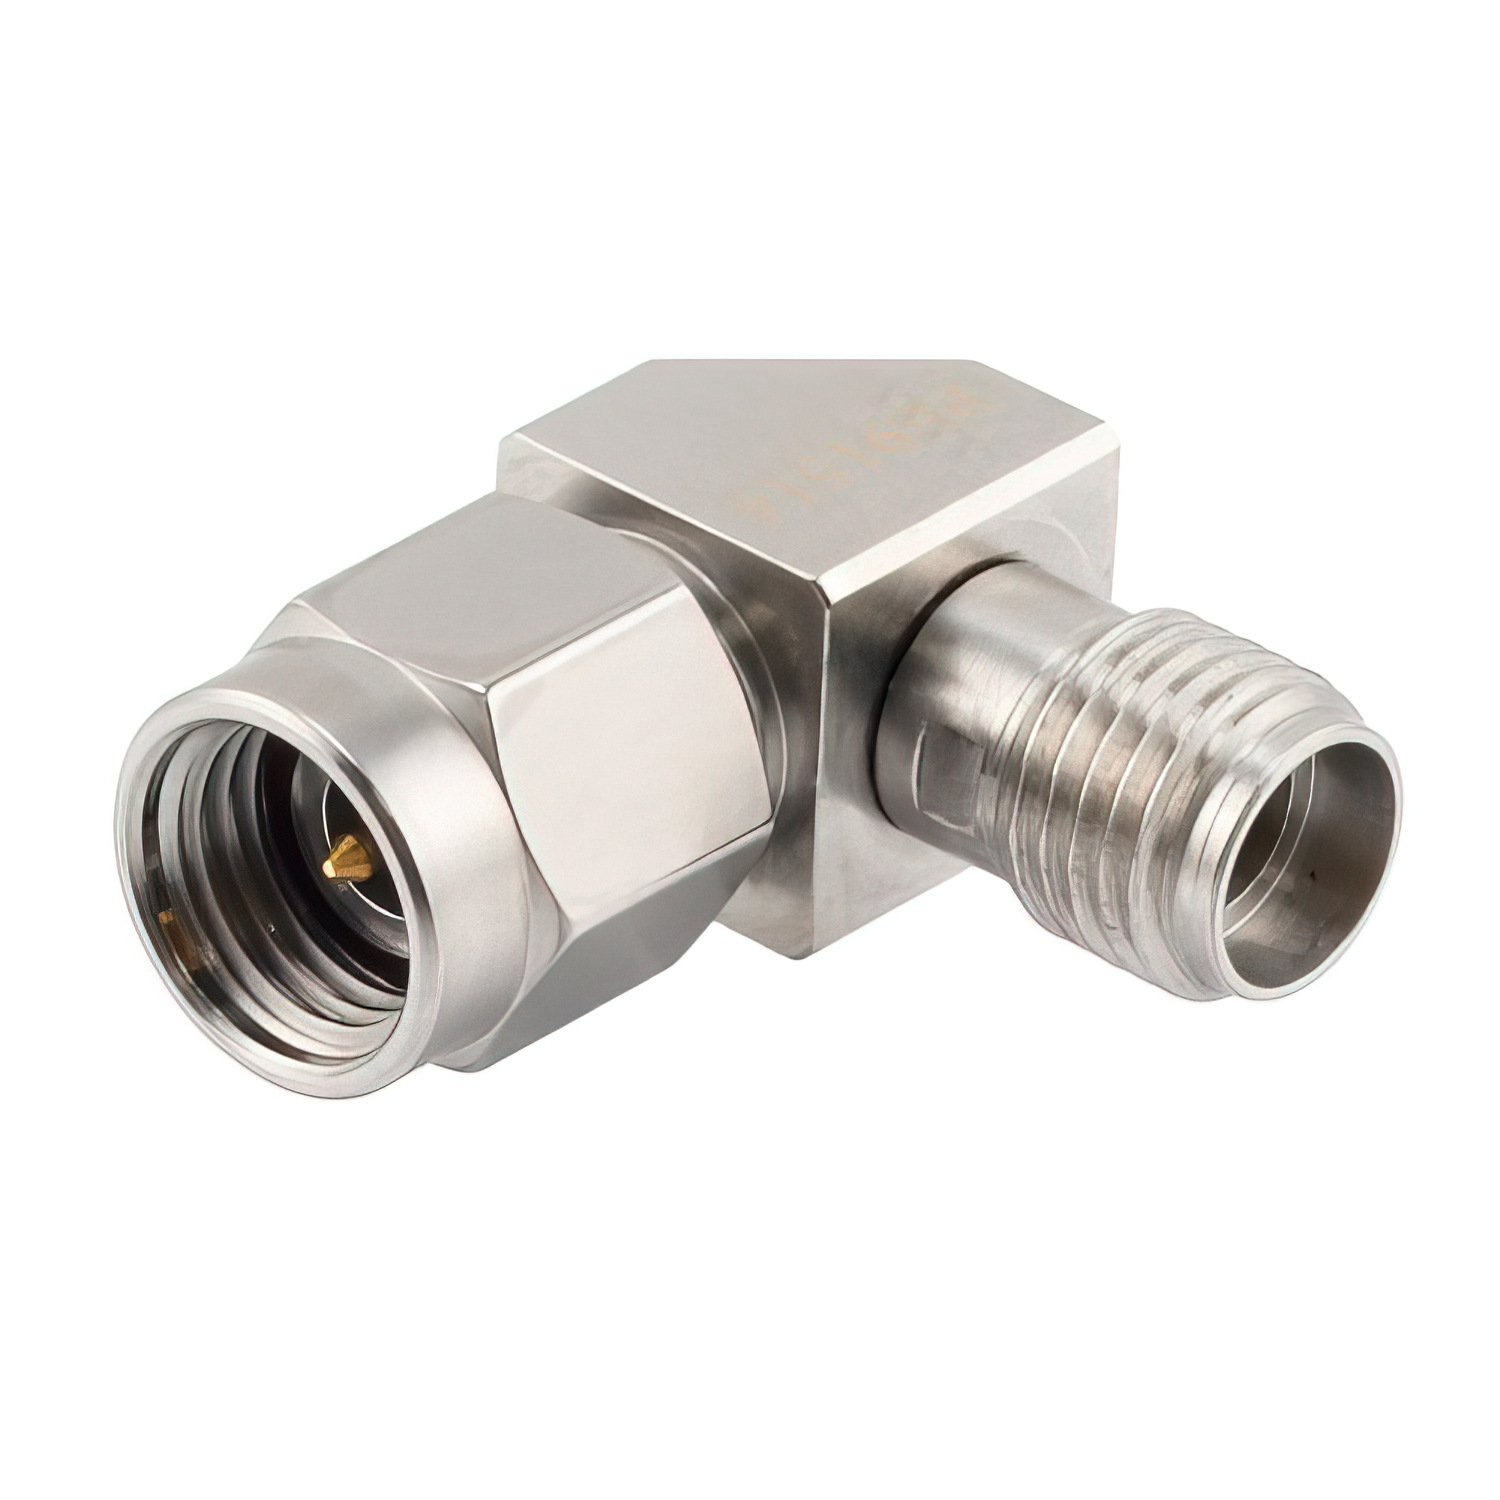 2.92mm Male to 3.5mm Female Miter Right Angle Adapter1